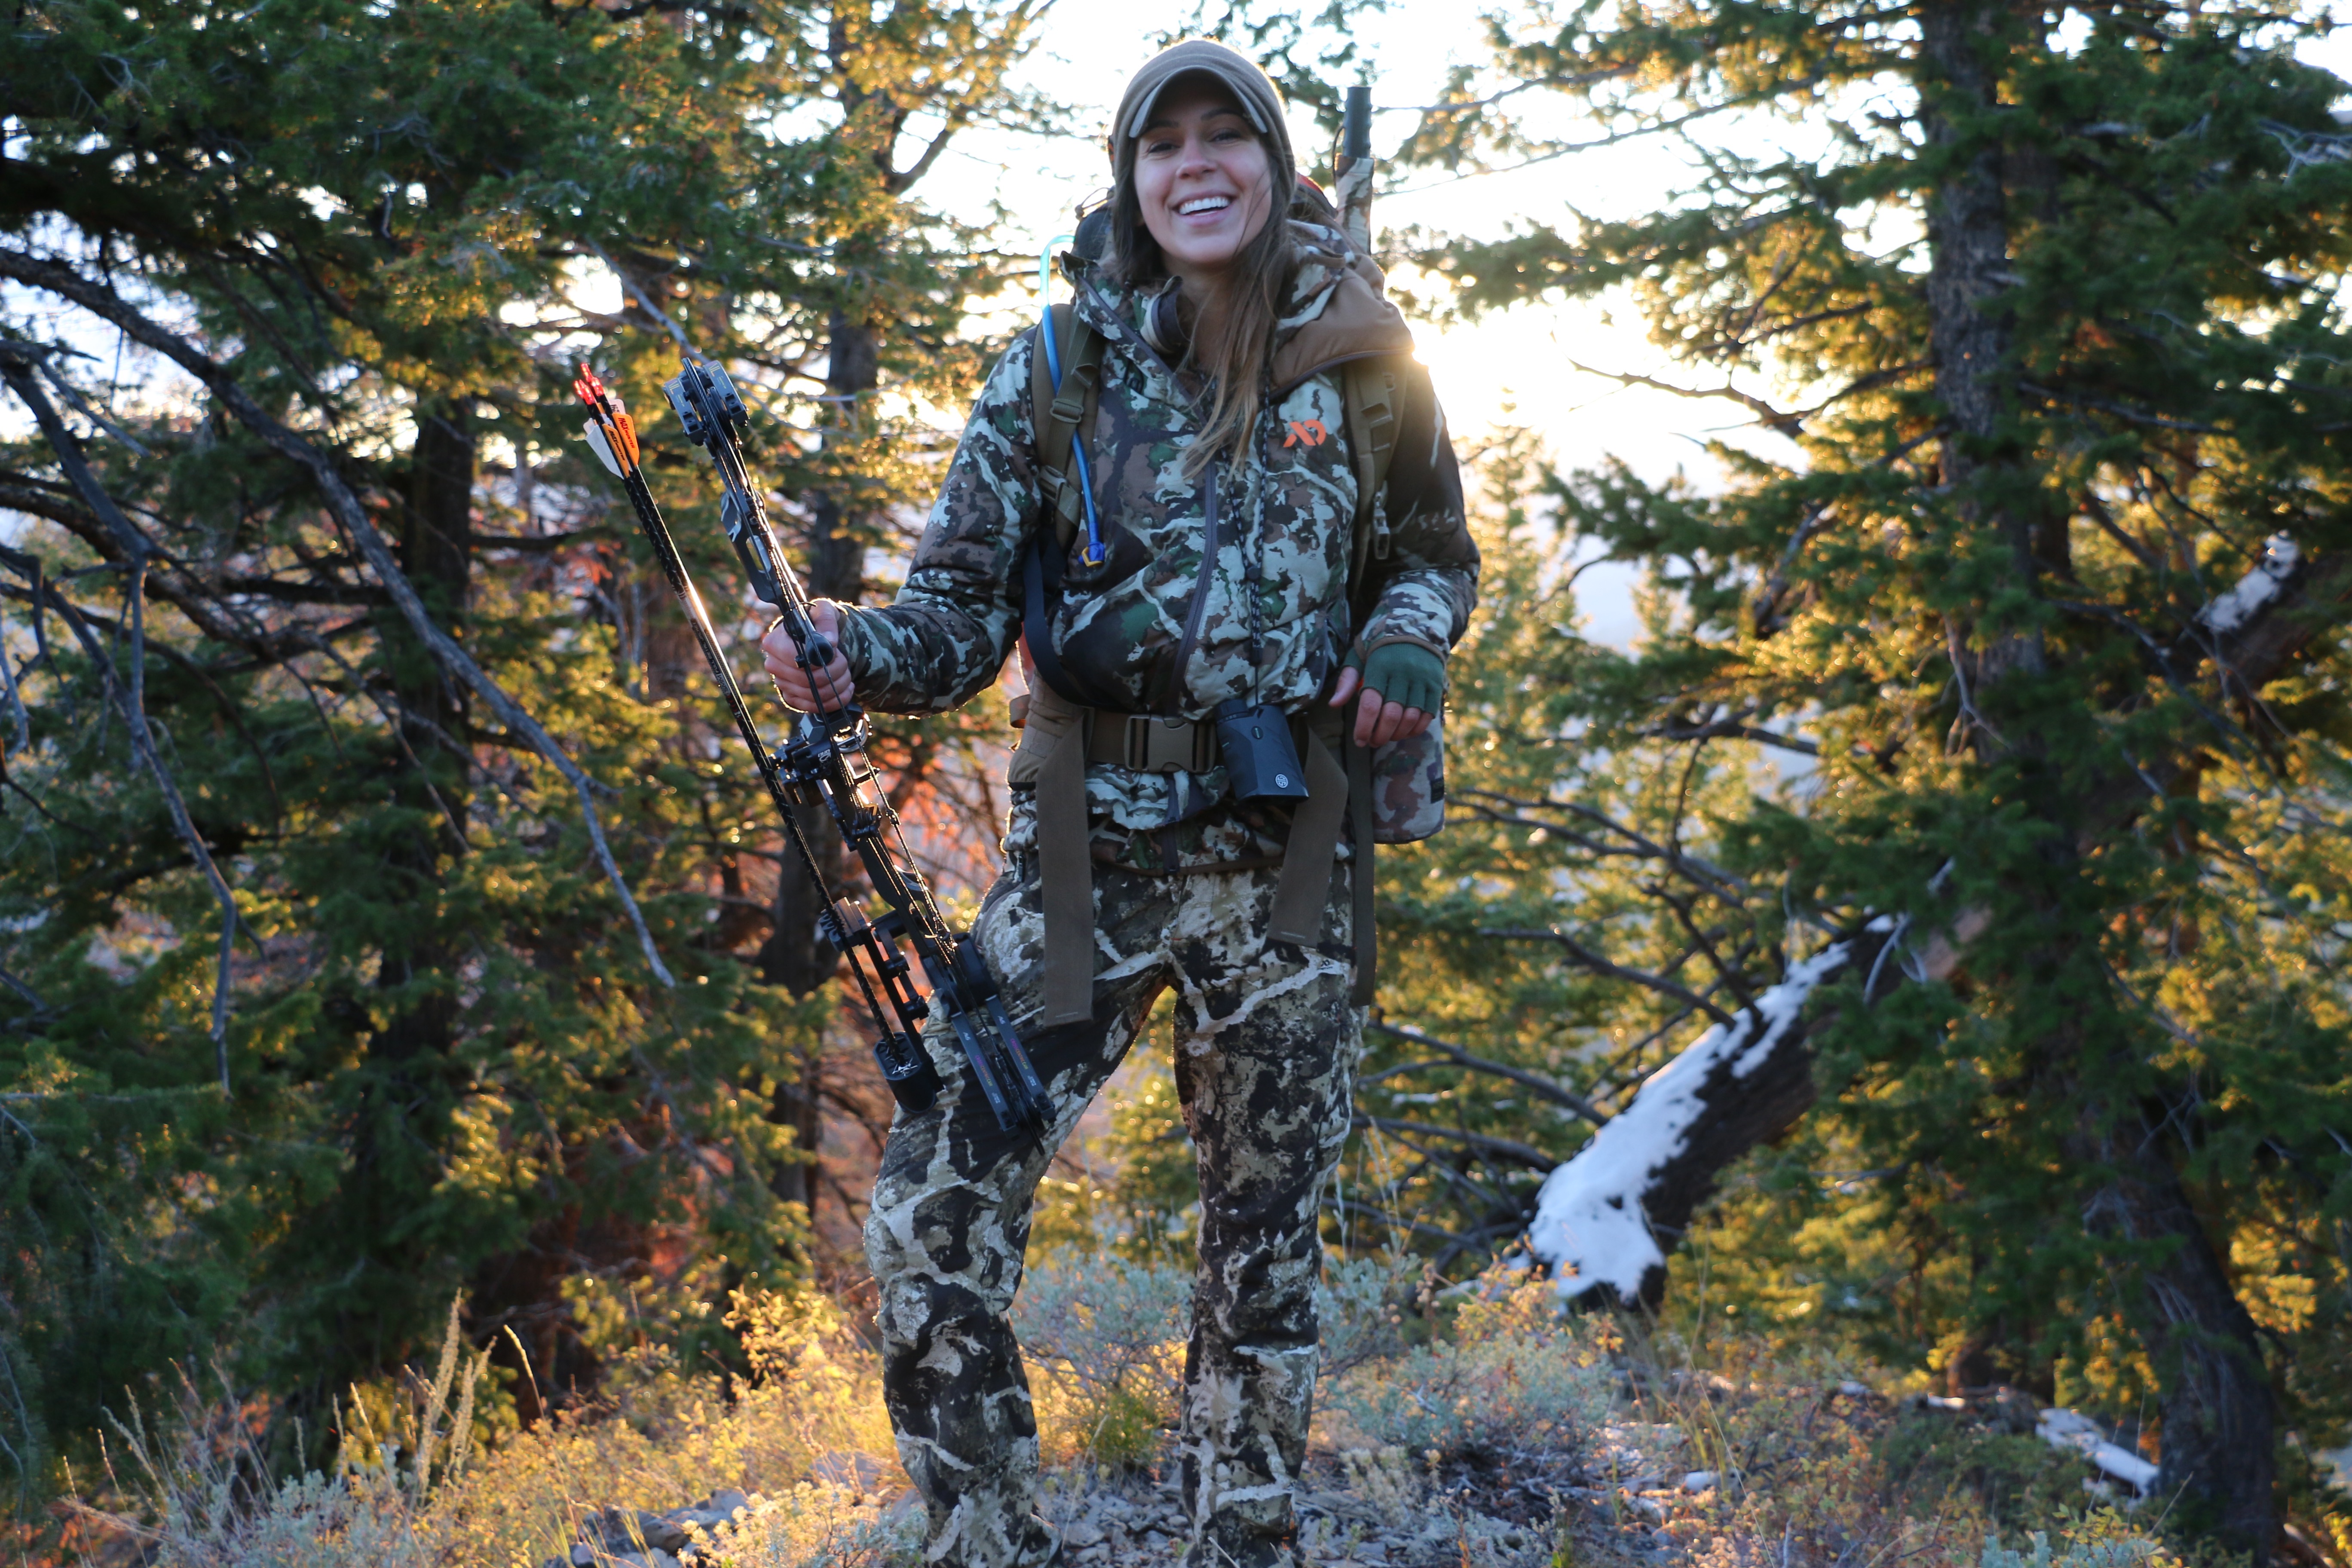 Outdoors Allie: My Bowhunting Story